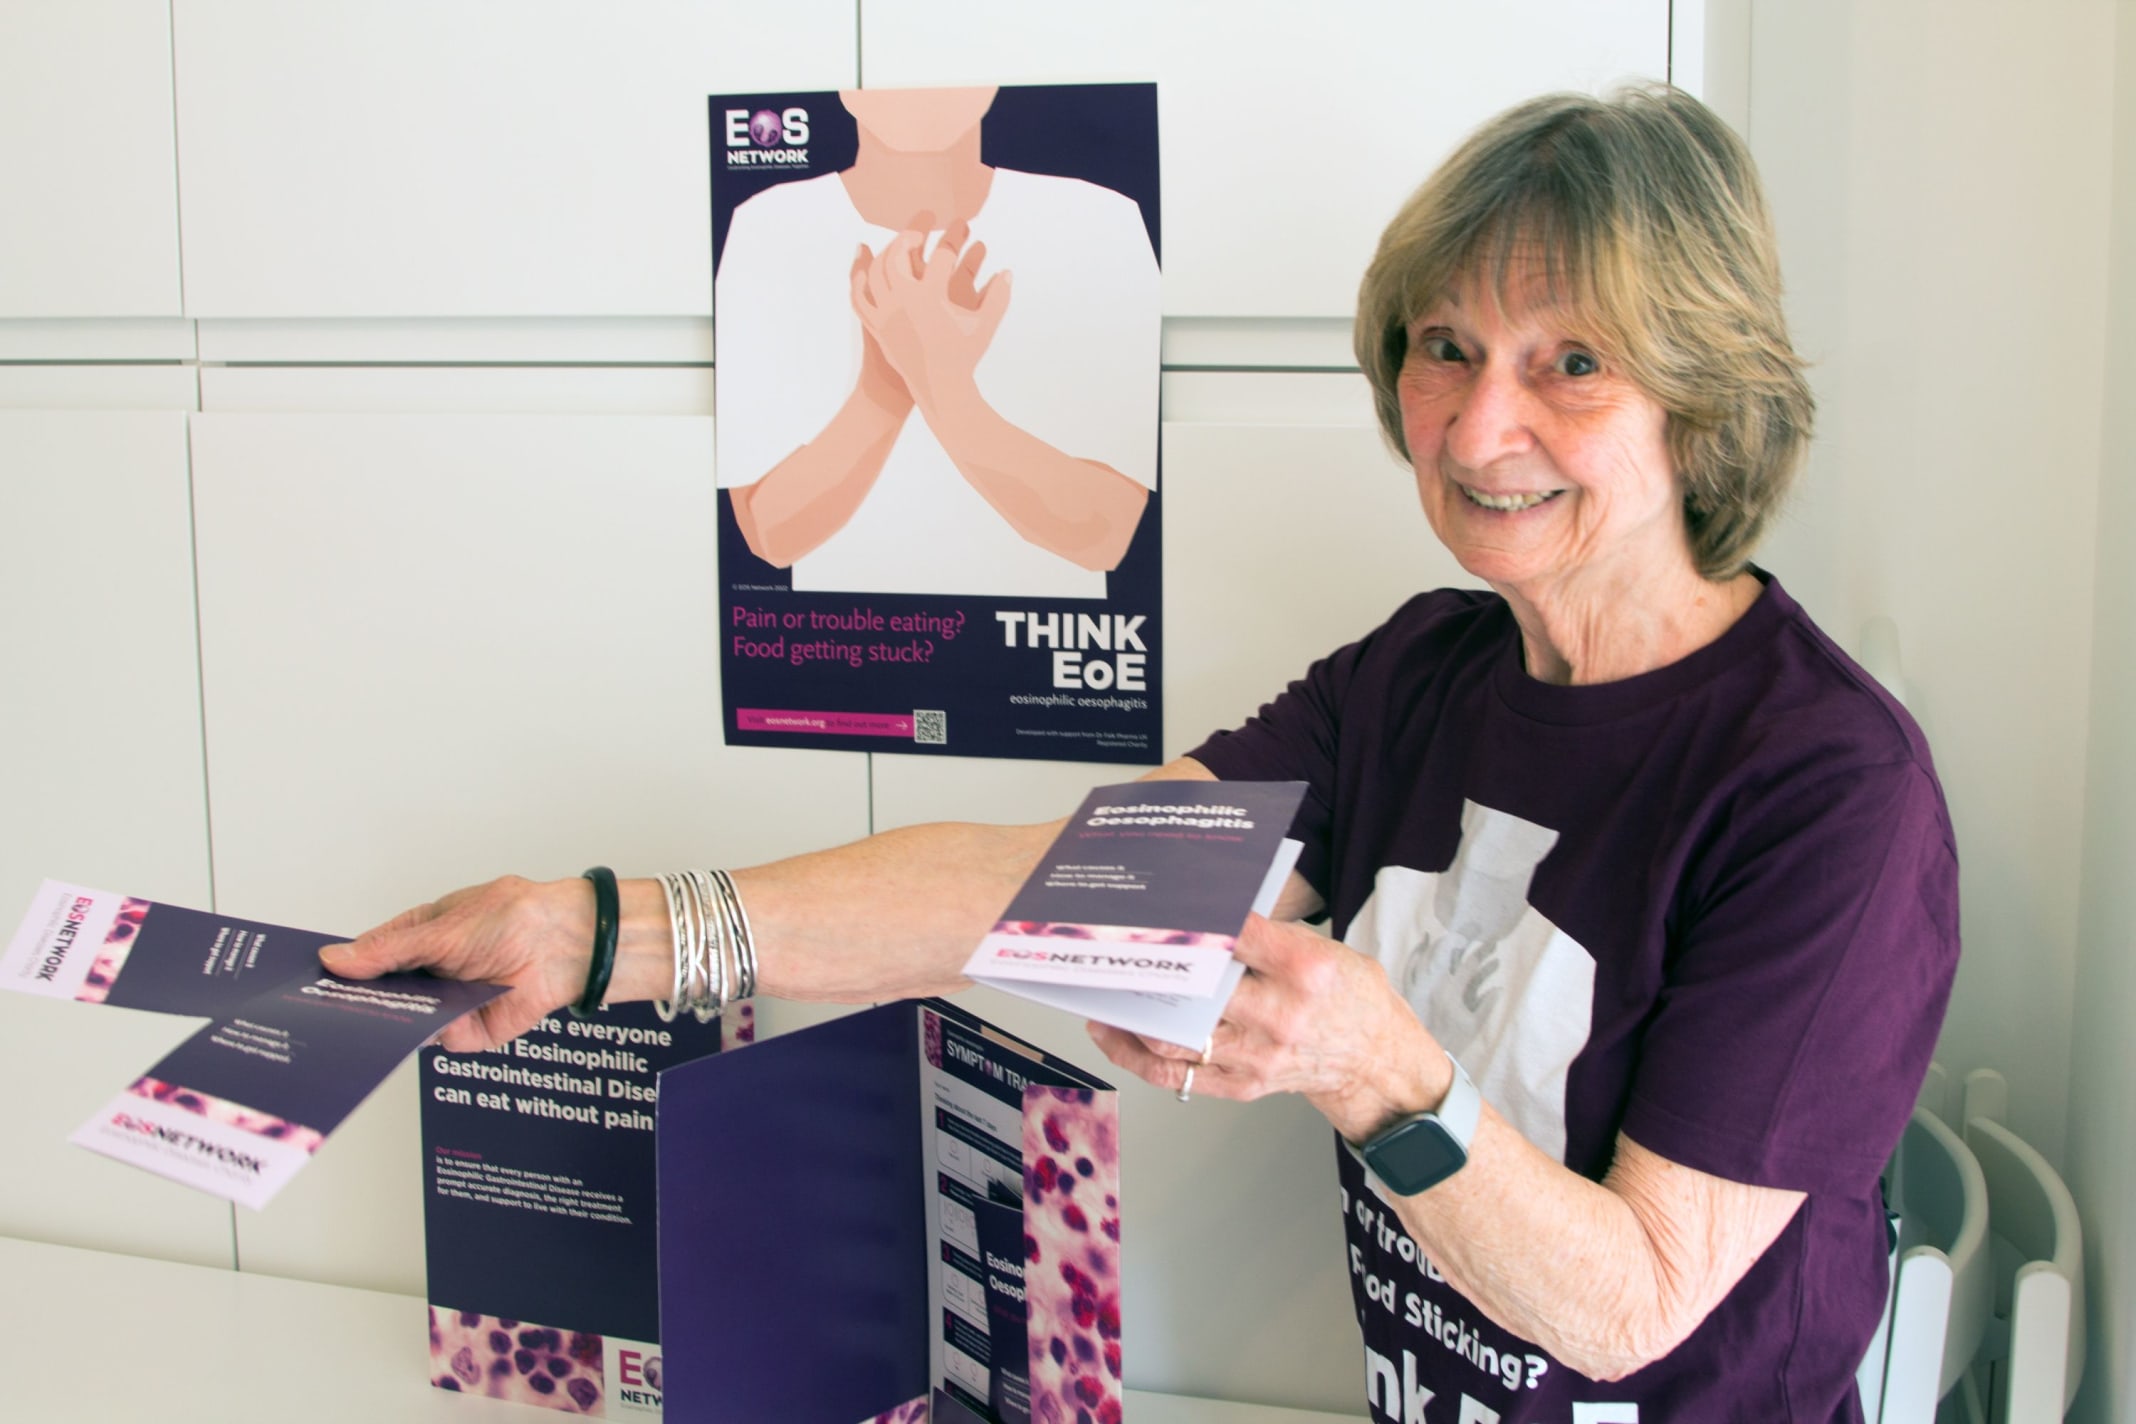 A woman in branding charity t shirt offering leaflets